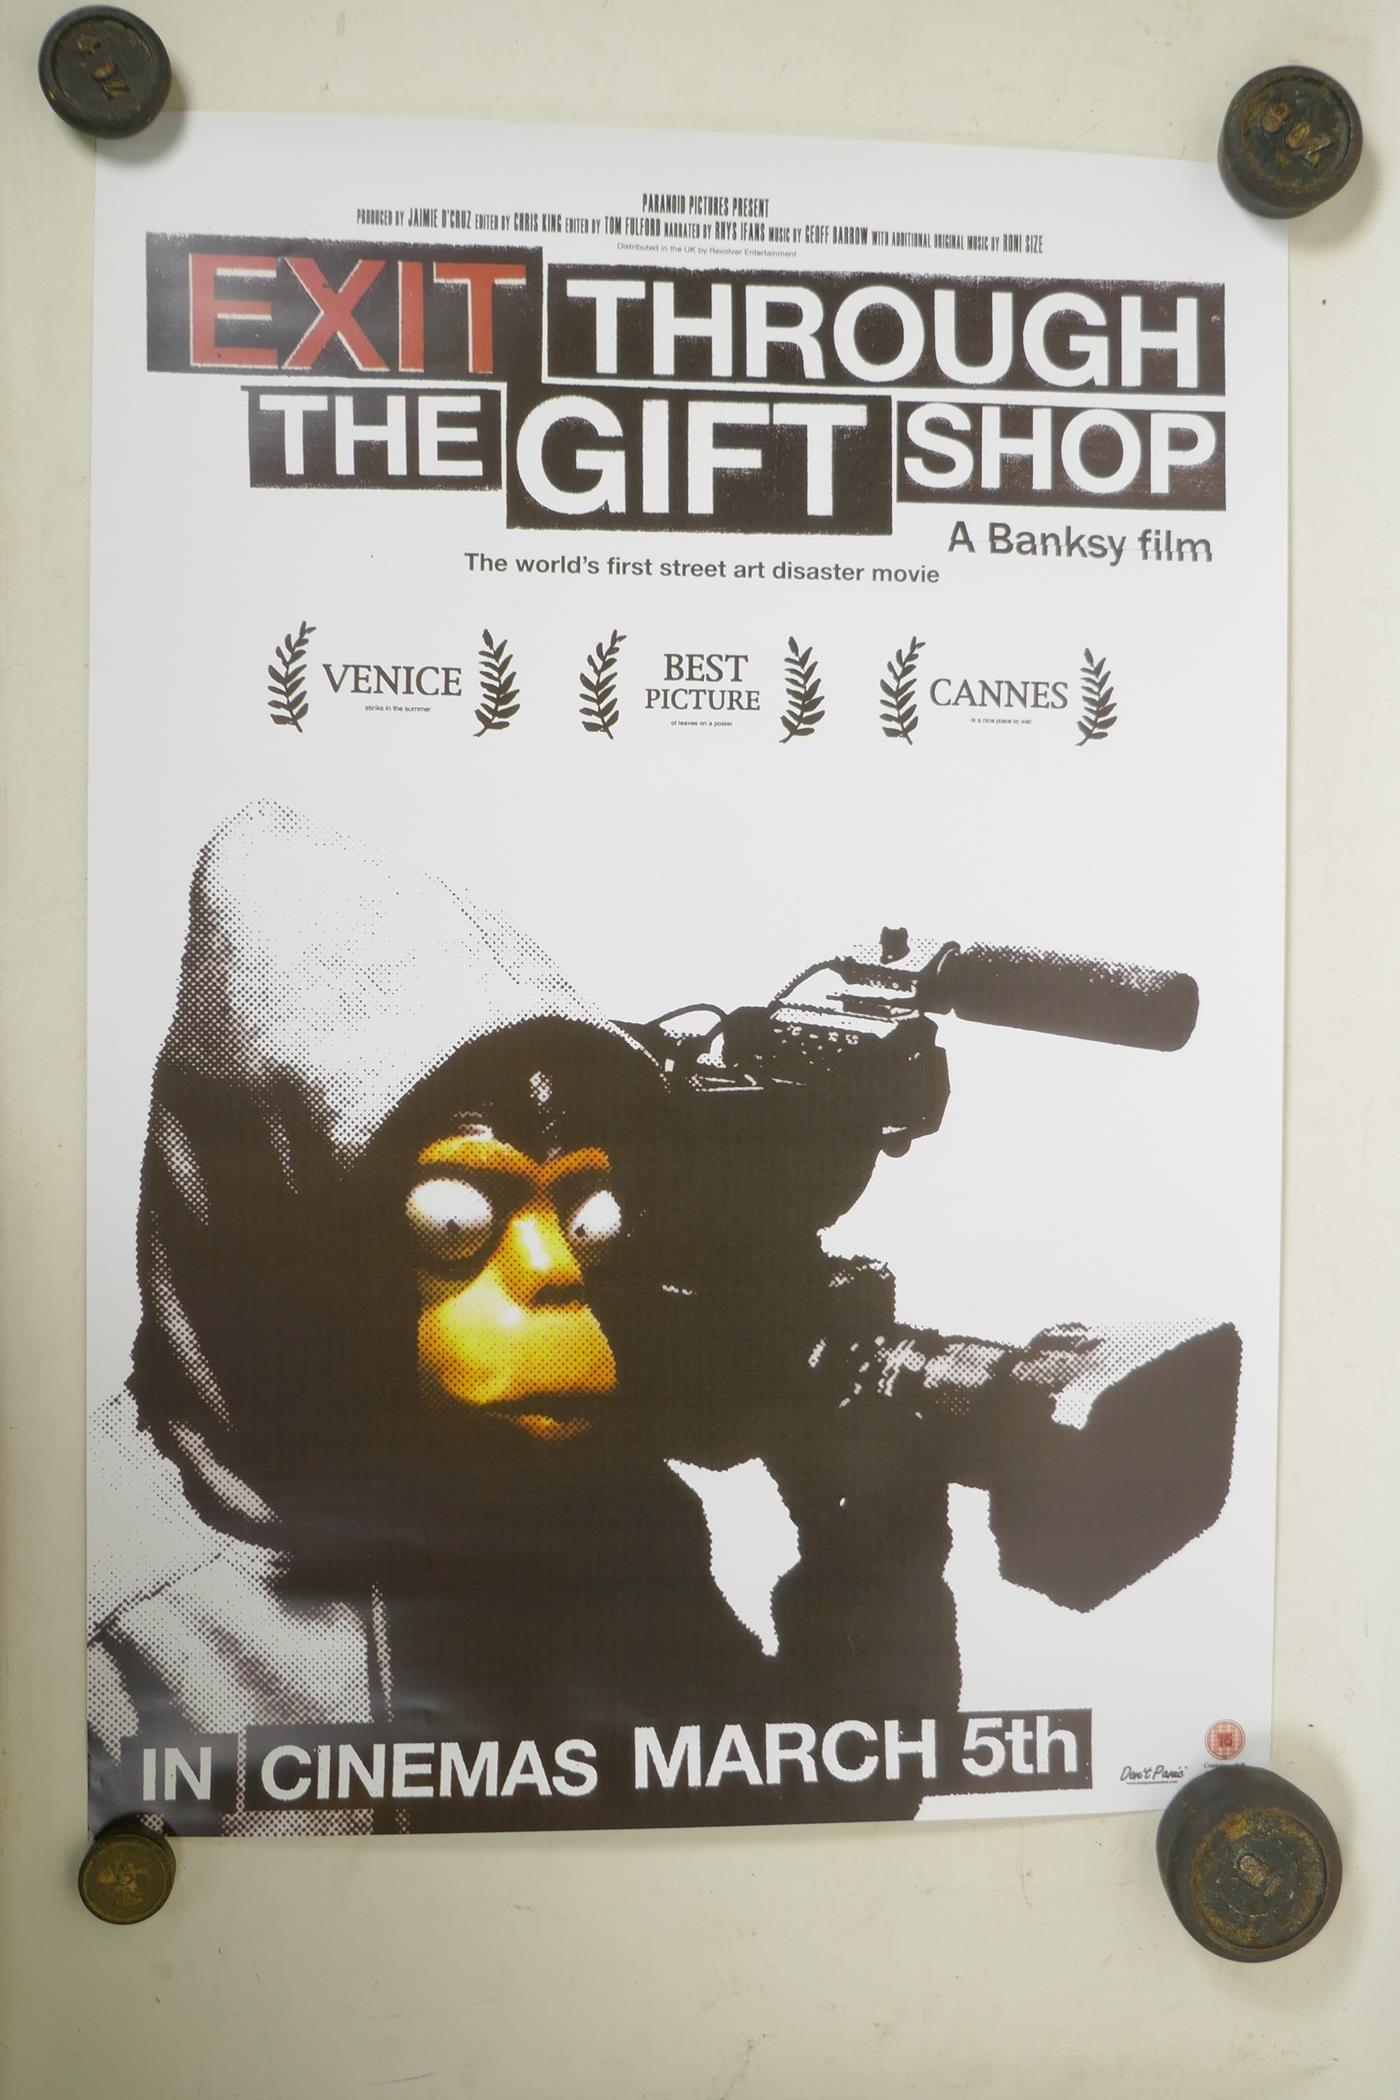 After Banksy, 'Exit through the Gift Shop' film poster, 16" x 23" - Image 2 of 2